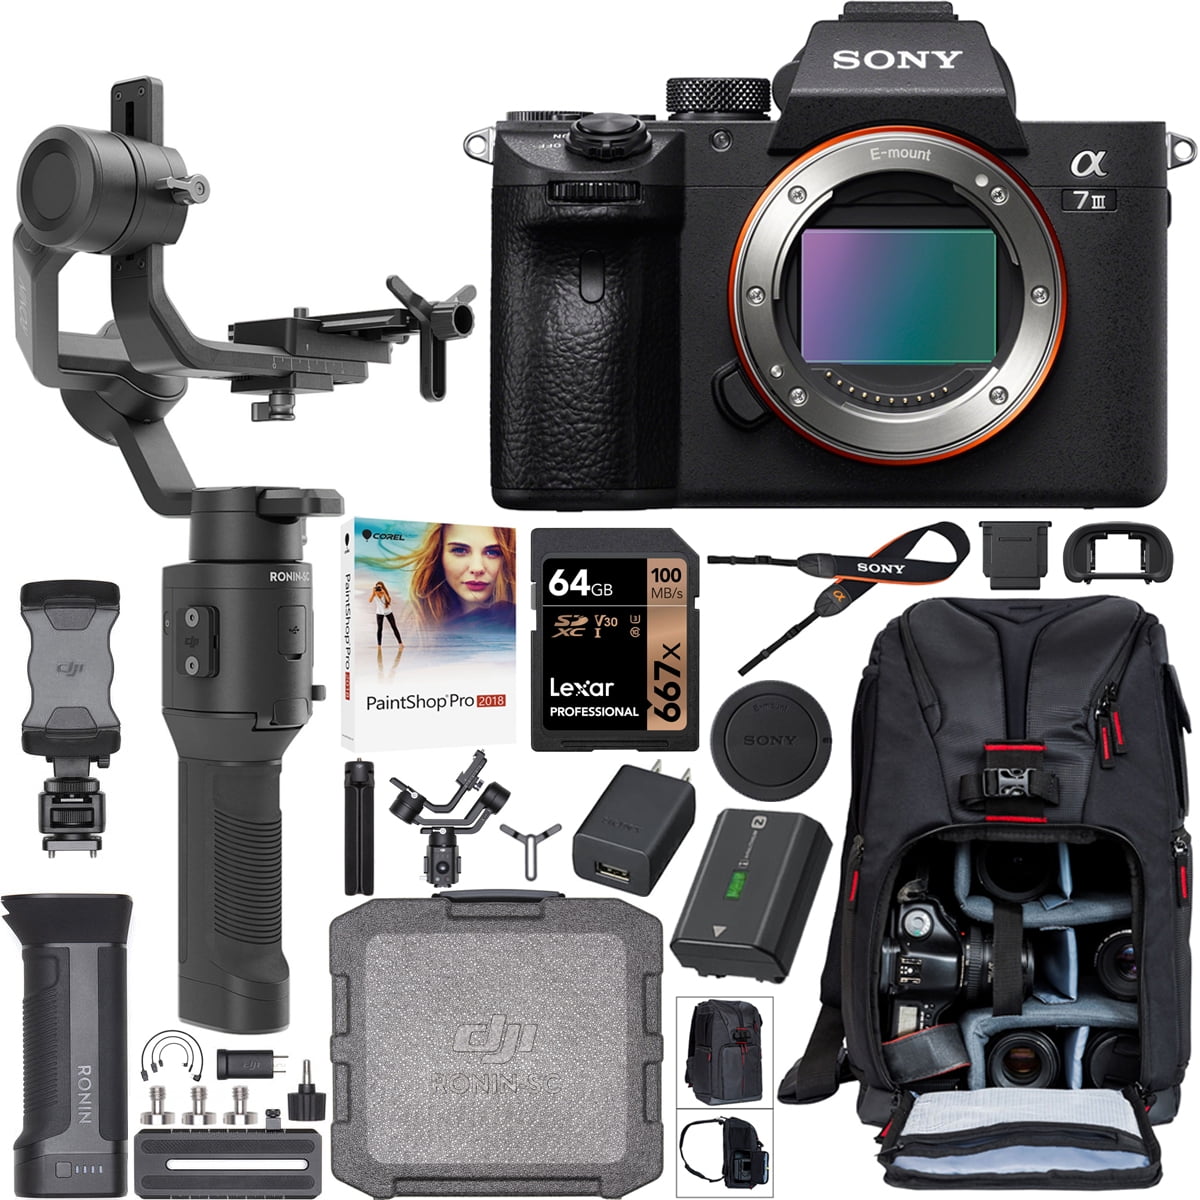 a7 III, a7RIII, a7R IV, a6600 Dual Charger 64GB SD Card 2 Green Extreme NP-FZ100 Battery DJI Ronin-SC Handheld 3-Axis Gimbal Stabilizer for Sony Mirrorless Camera, Pro Video Bundle with Bag 